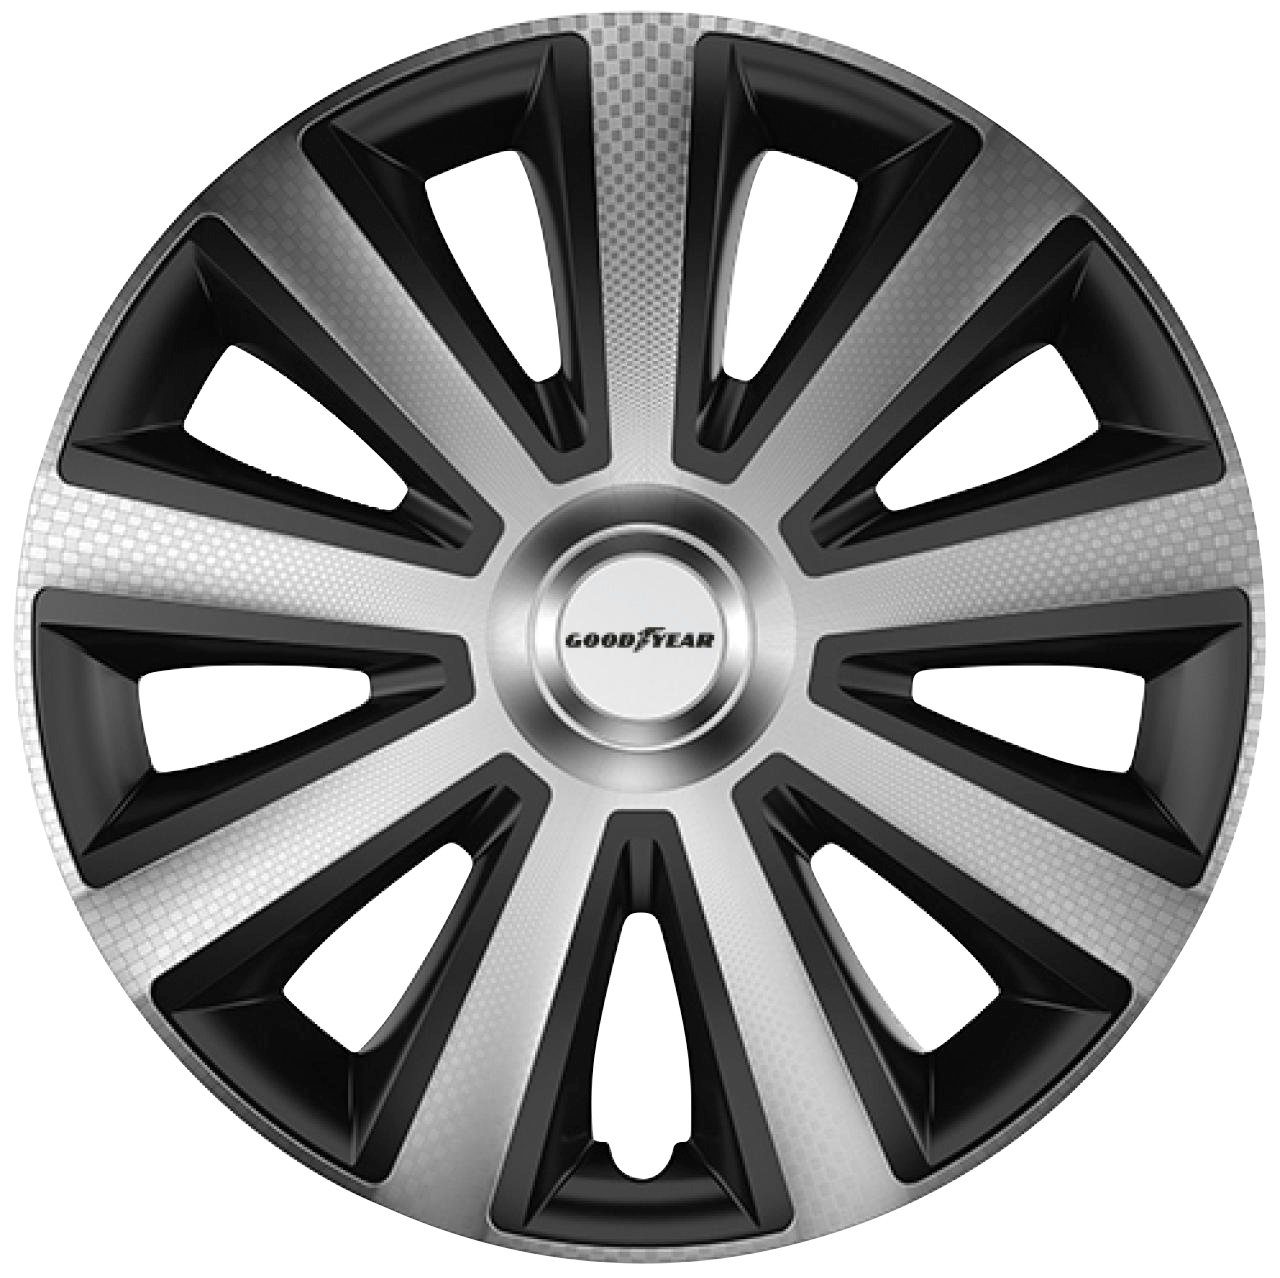 Goodyear Radkappe Memphis 15, Zoll, (Set, 4-St) Carbon in 15